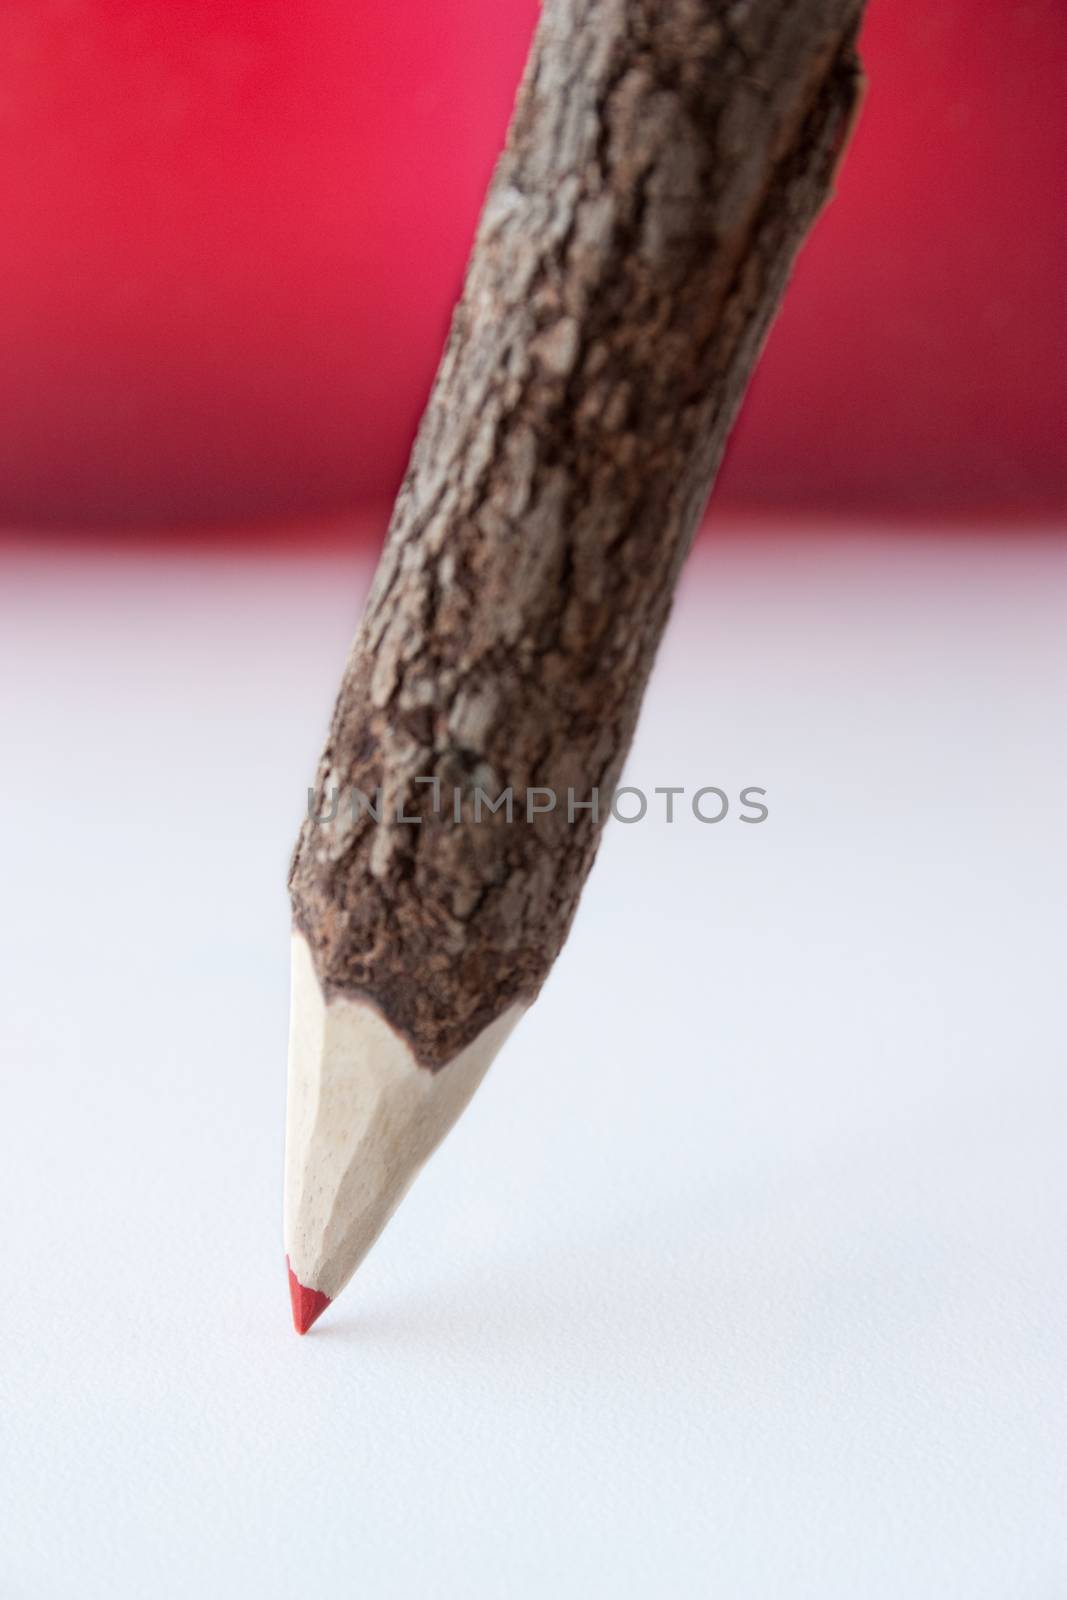 Red pencil red and white background by evdayan